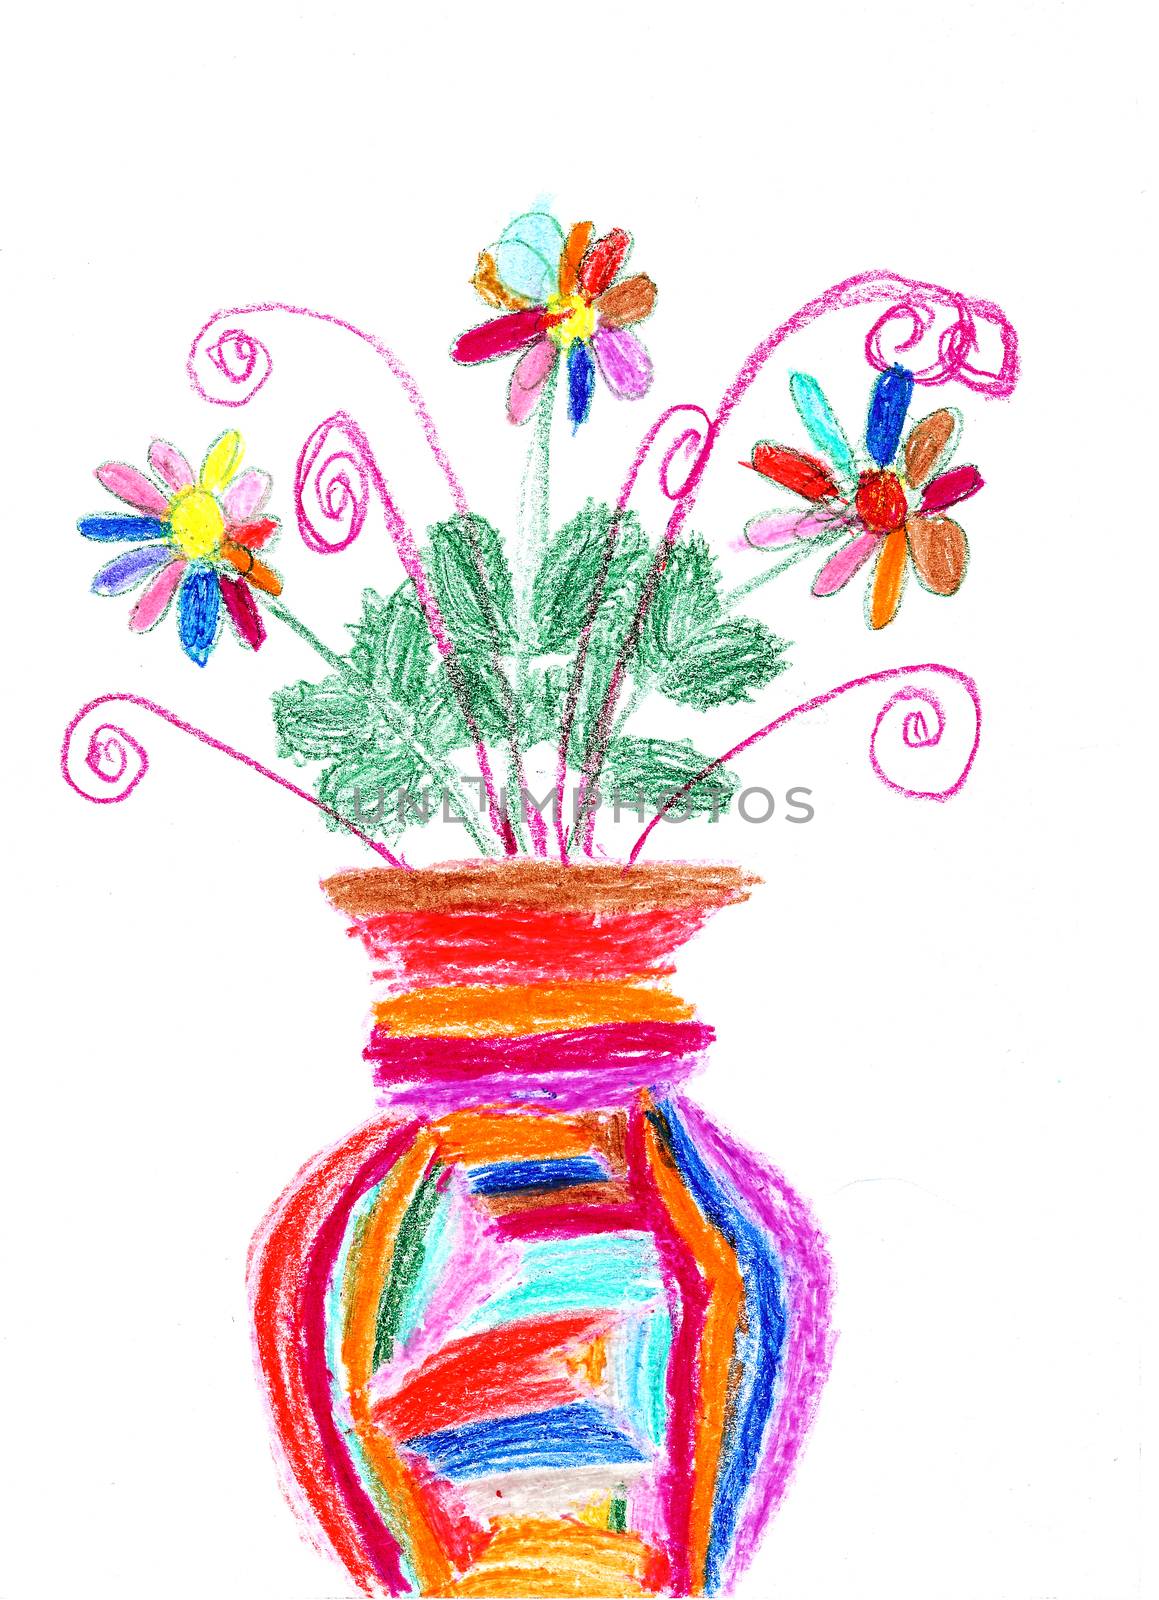 Childrens drawing of a colorful bouquet by Strekalova